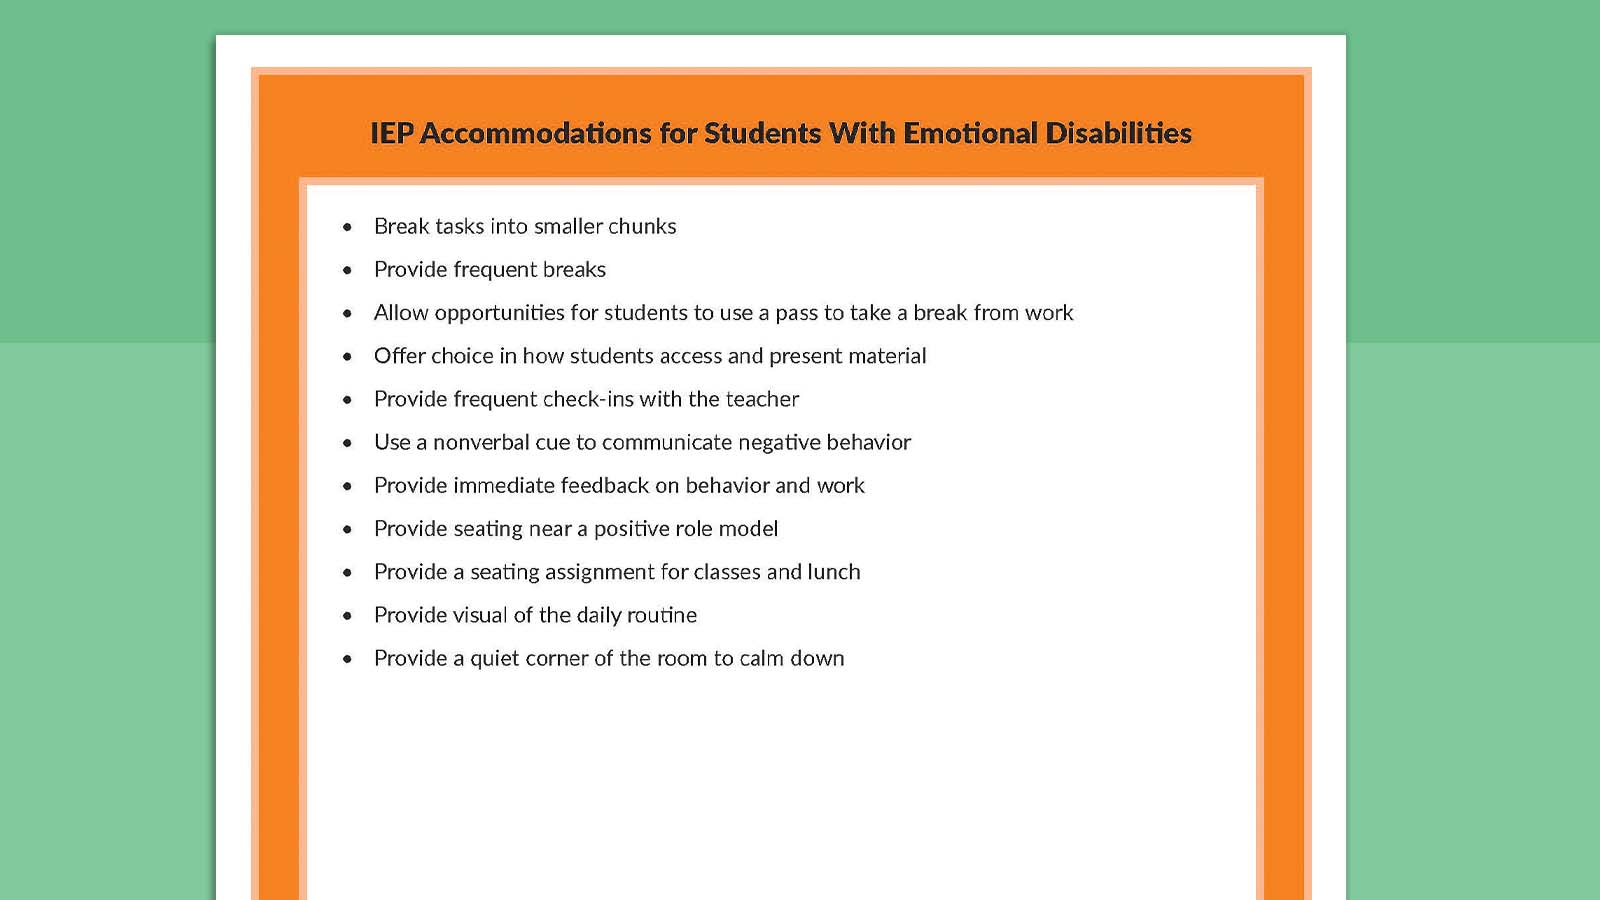 Printable sheet listing IEP accommodations for students with emotional disabilities.